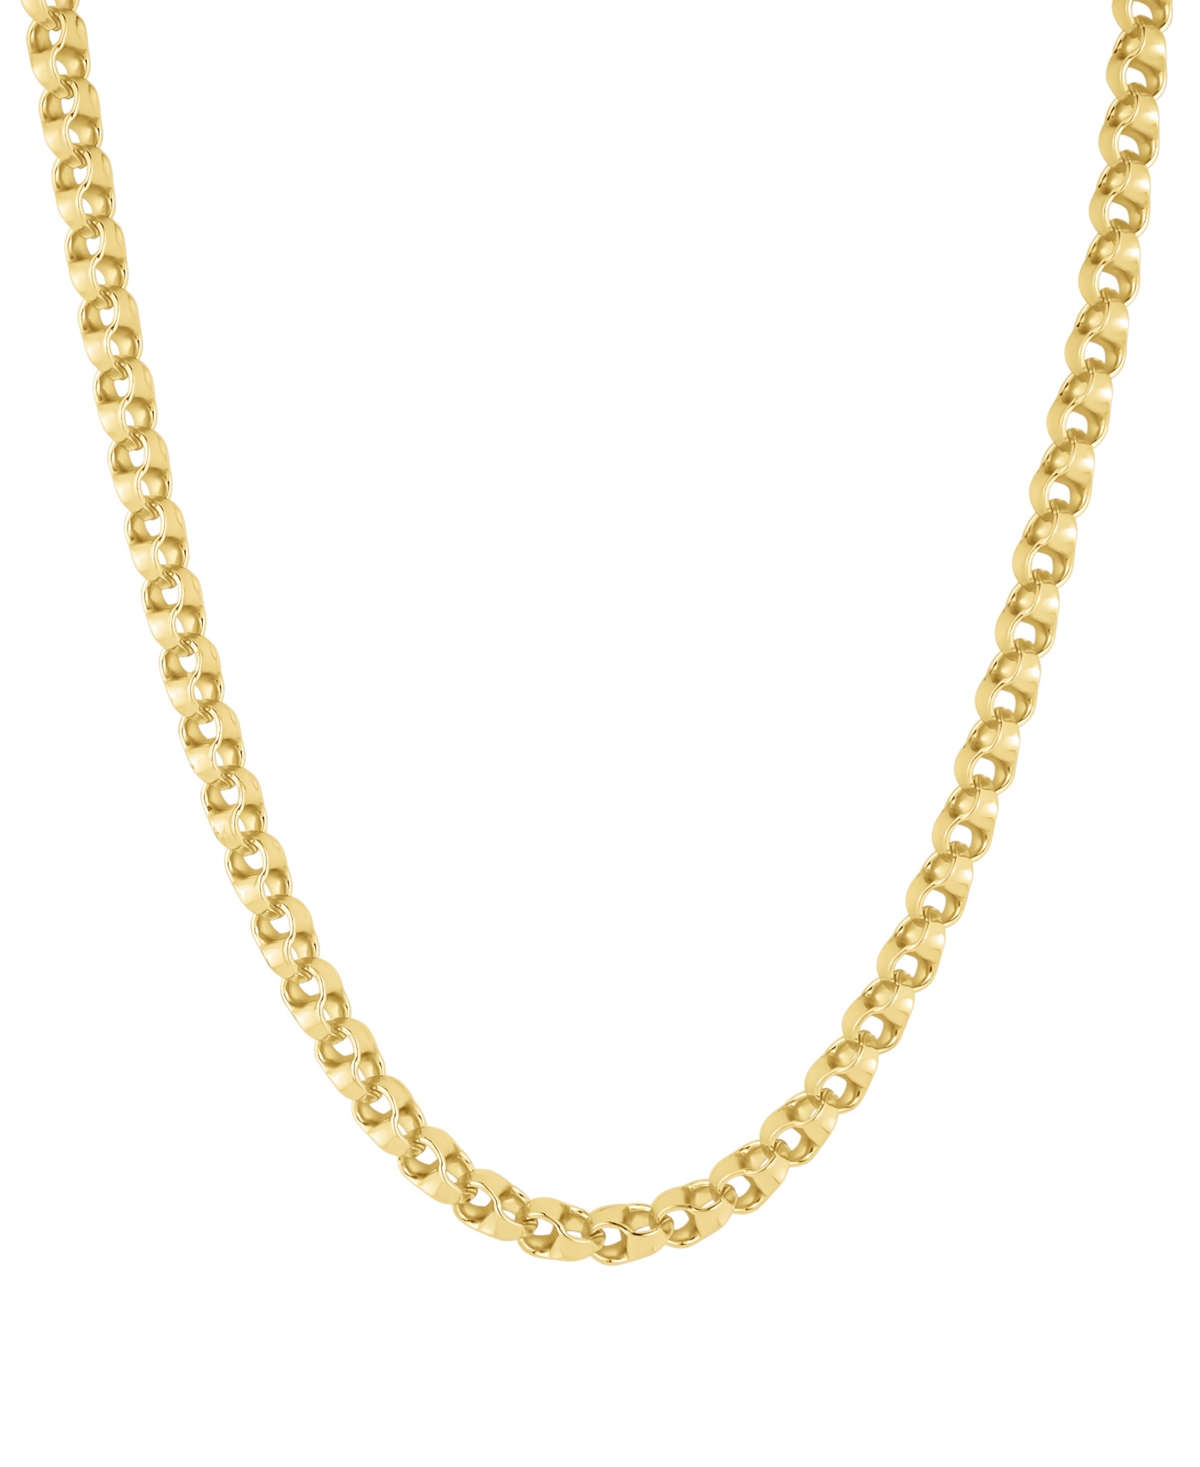 18K Gold Plated Necklace - K Gold Plated Over Brass